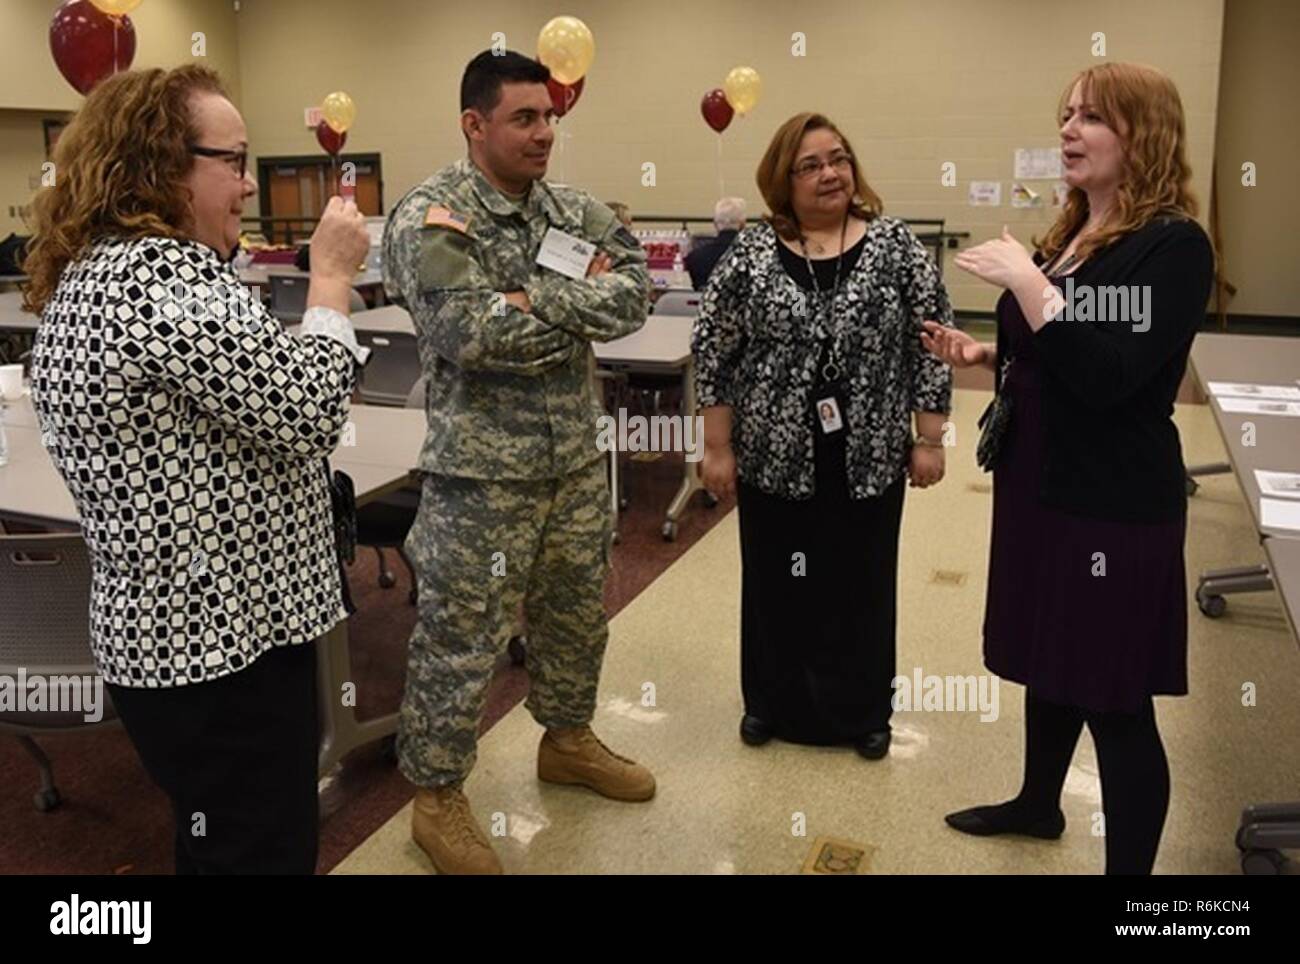 (From left to right) Mary Loss, a reading coach at Abraham Lincoln Elementary School, in Cicero, Ill, Army Sgt. Edgar A. Valdez-De Leon, a public affairs specialist, assigned to the 220th Public Affairs Detachment, Southfield, Mich., Marilyn Morales, and Philena Pugh, career day event coordinators for the Abraham Lincoln Elementary School, in Cicero, Ill. discuss the overall experience of the event May 5, 2017. Pugh and Morales both agree to invite Valdez-De Leon to the next annual career day to further share his success in the Army Reserve. Stock Photo